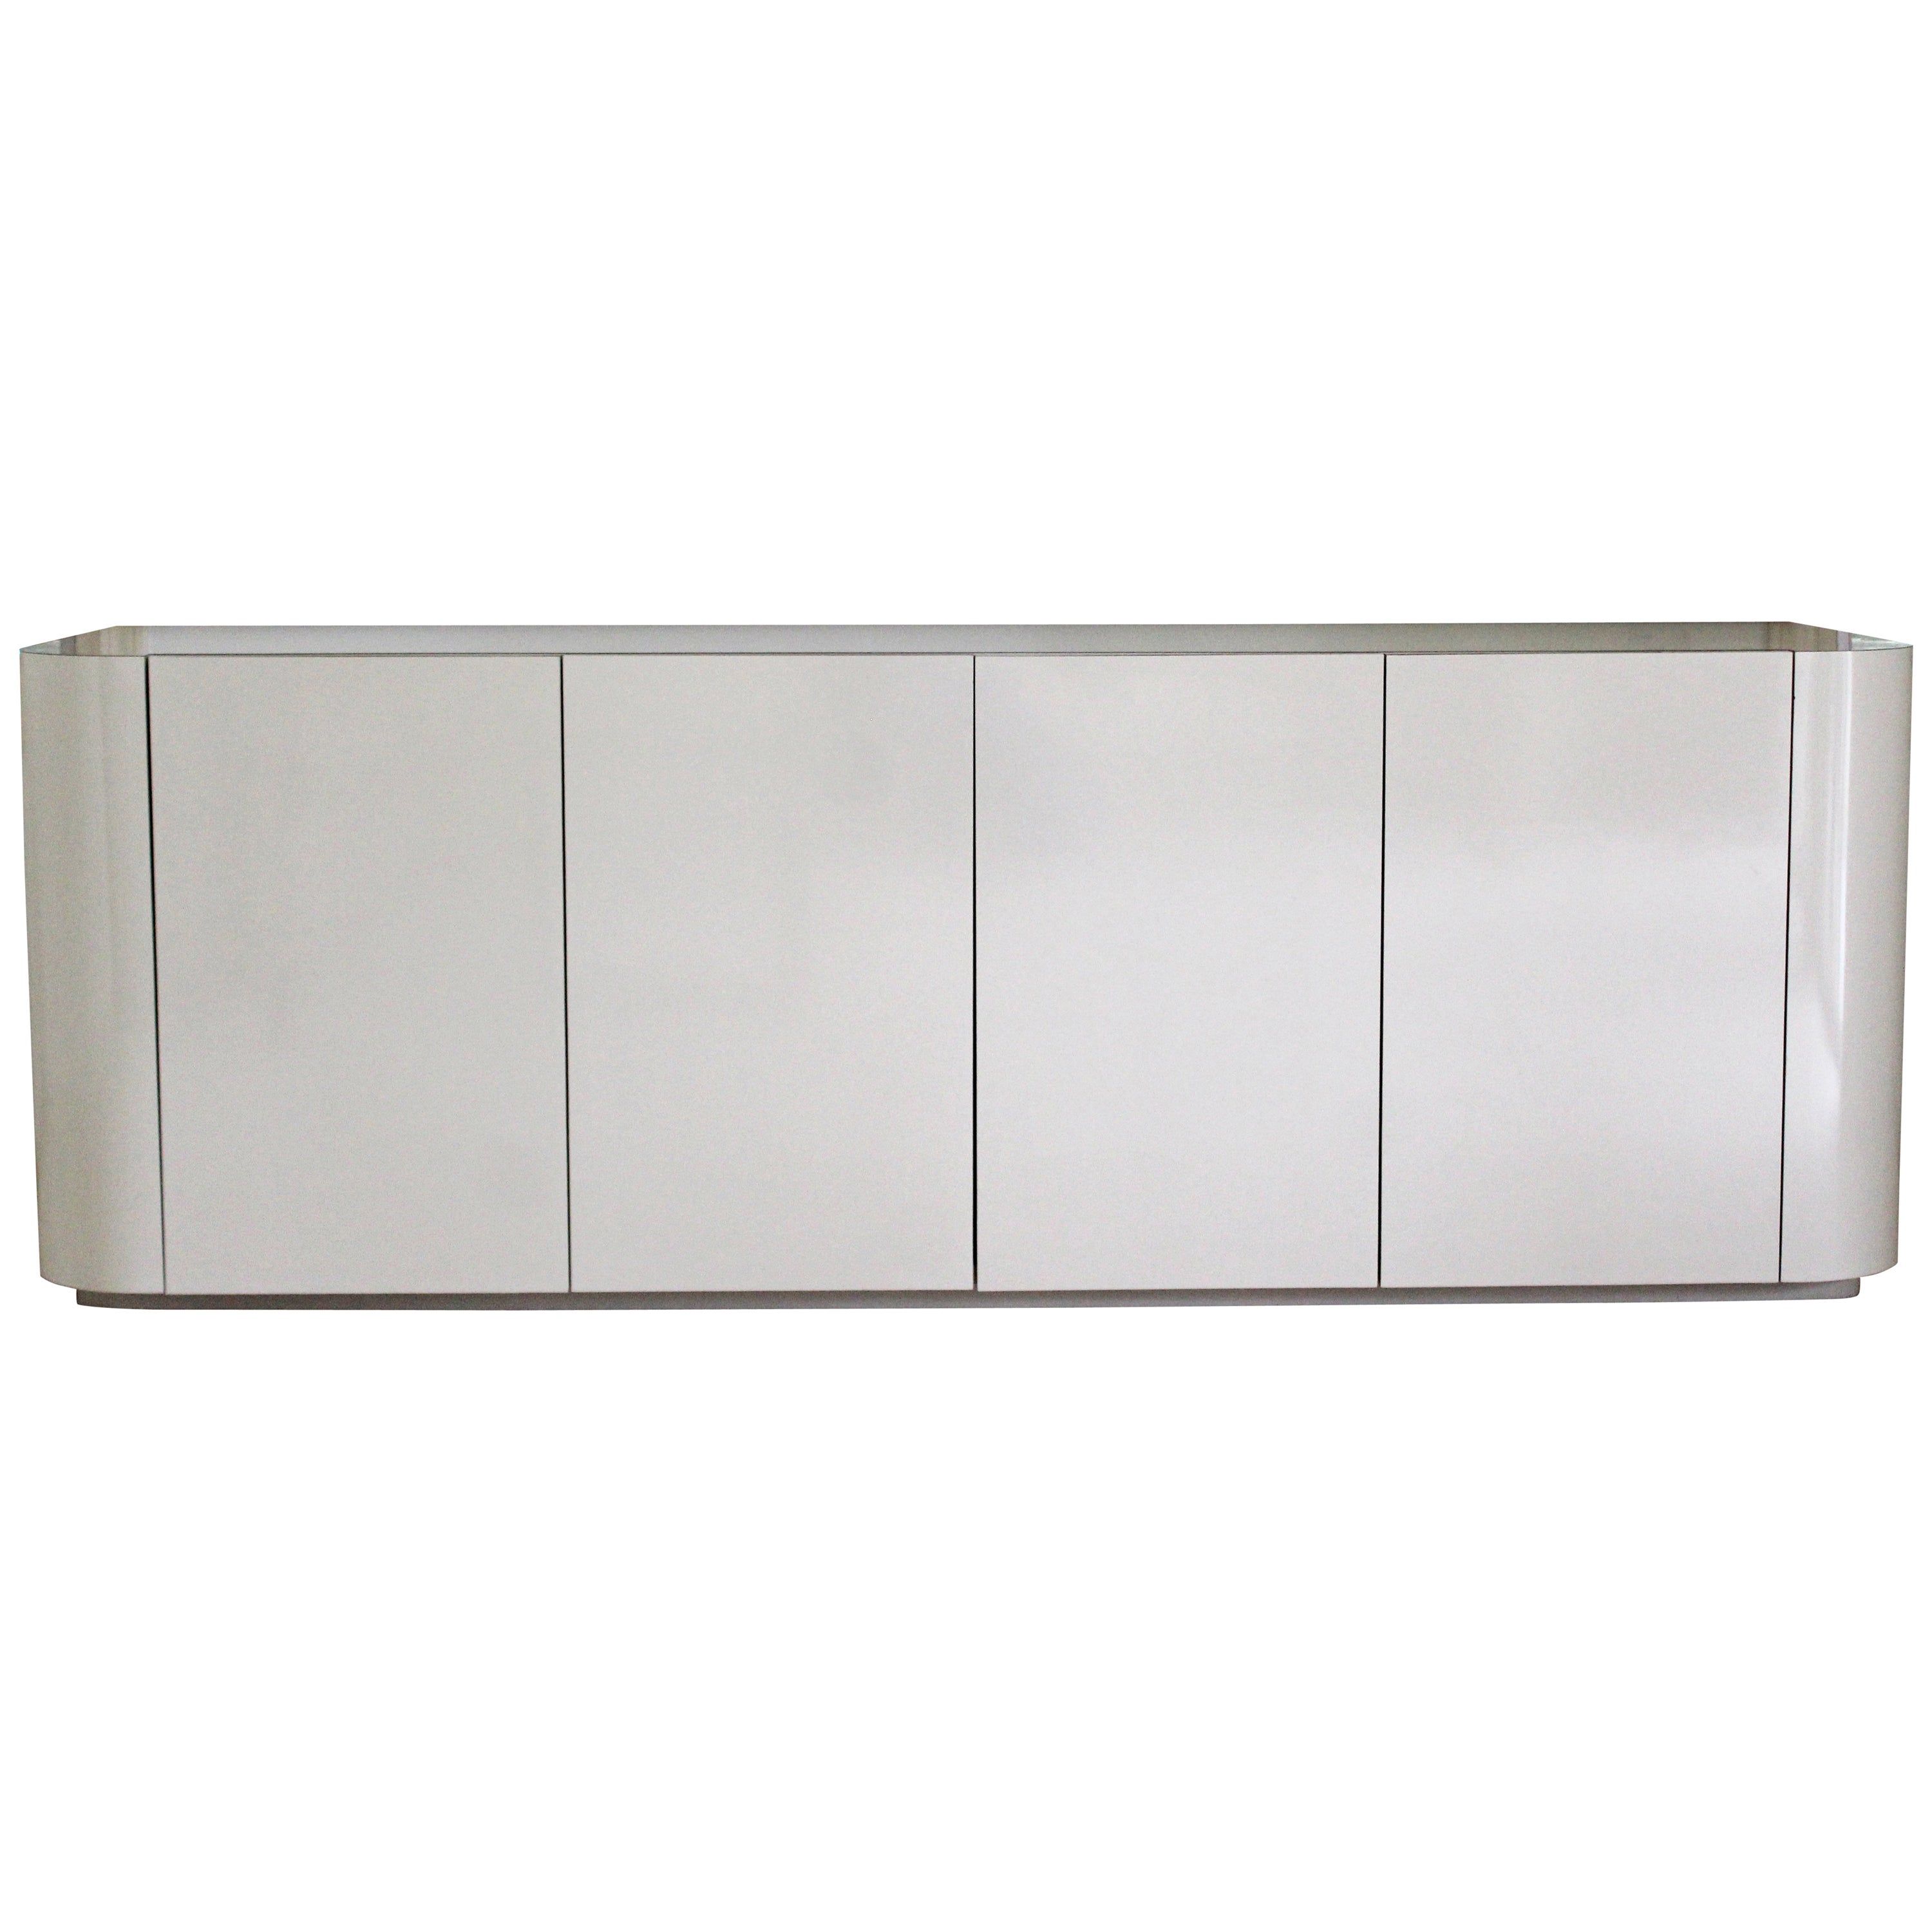 White Credenza Cabinet | Mail Cabinet In Abhinav Credenzas (View 28 of 30)